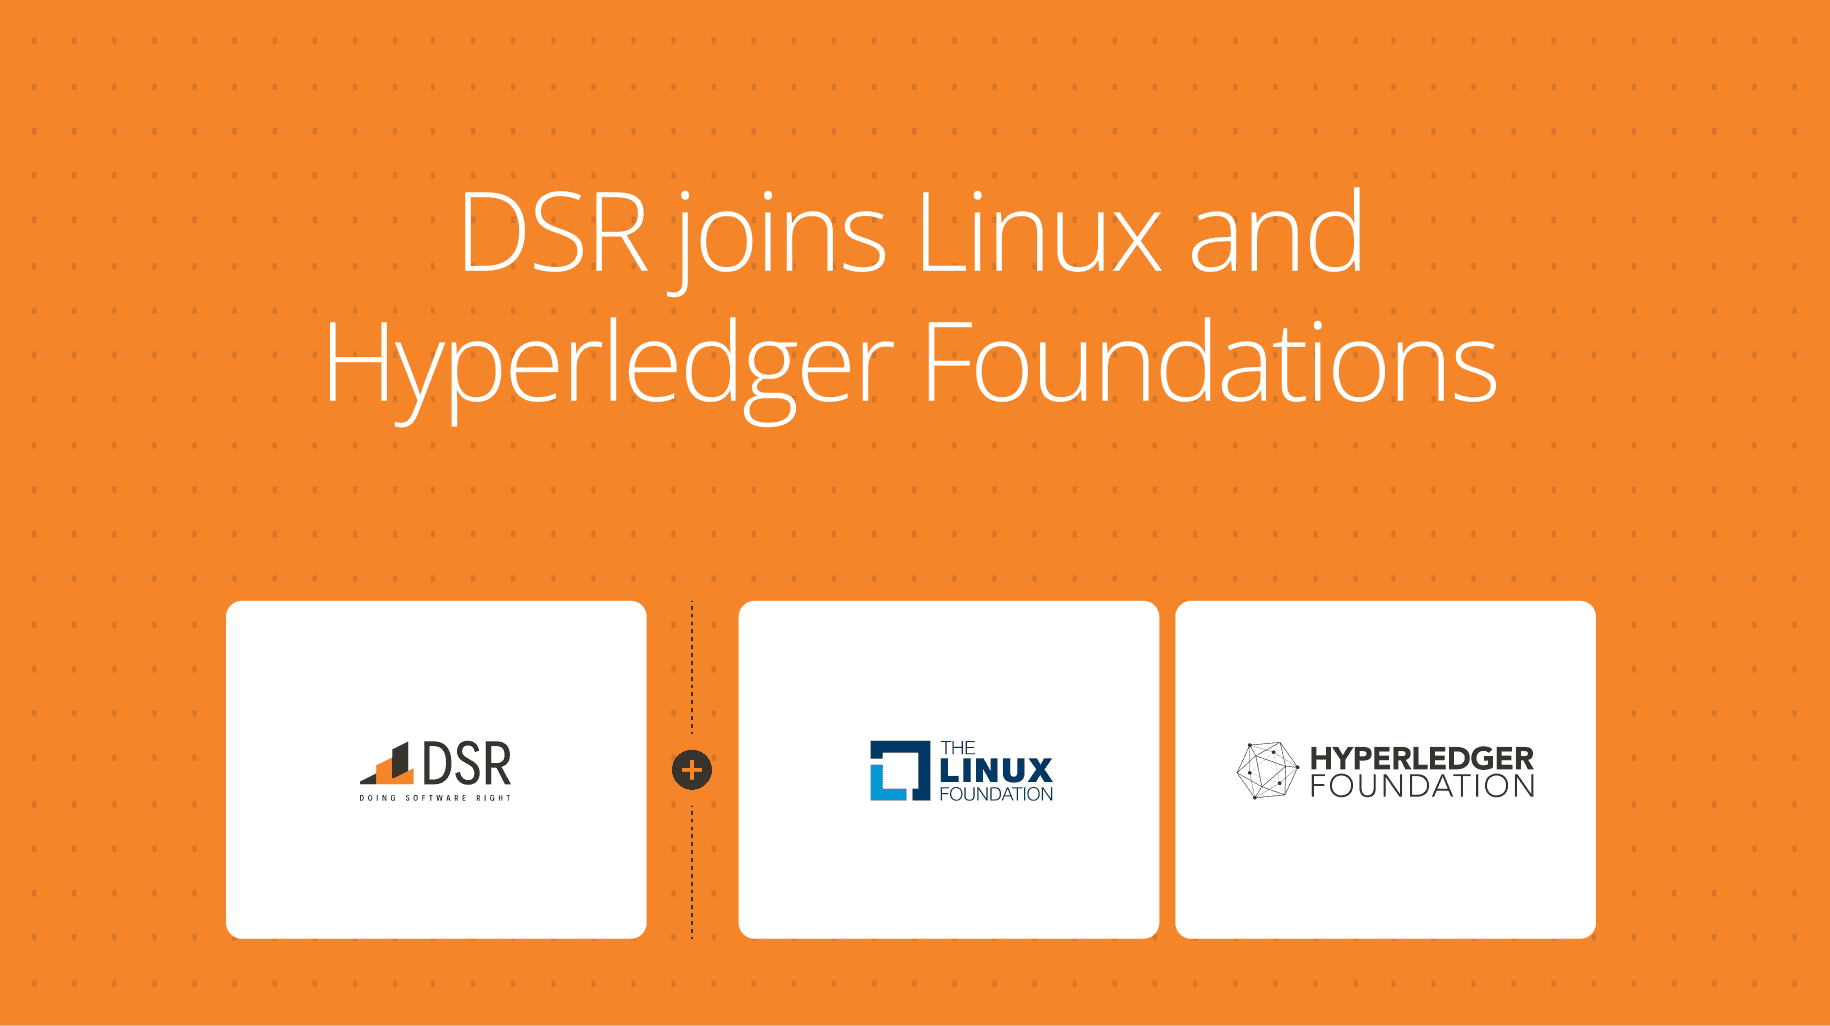 DSR joins Linux and Hyperledger Foundations to help build a decentralized Web 3.0 world 